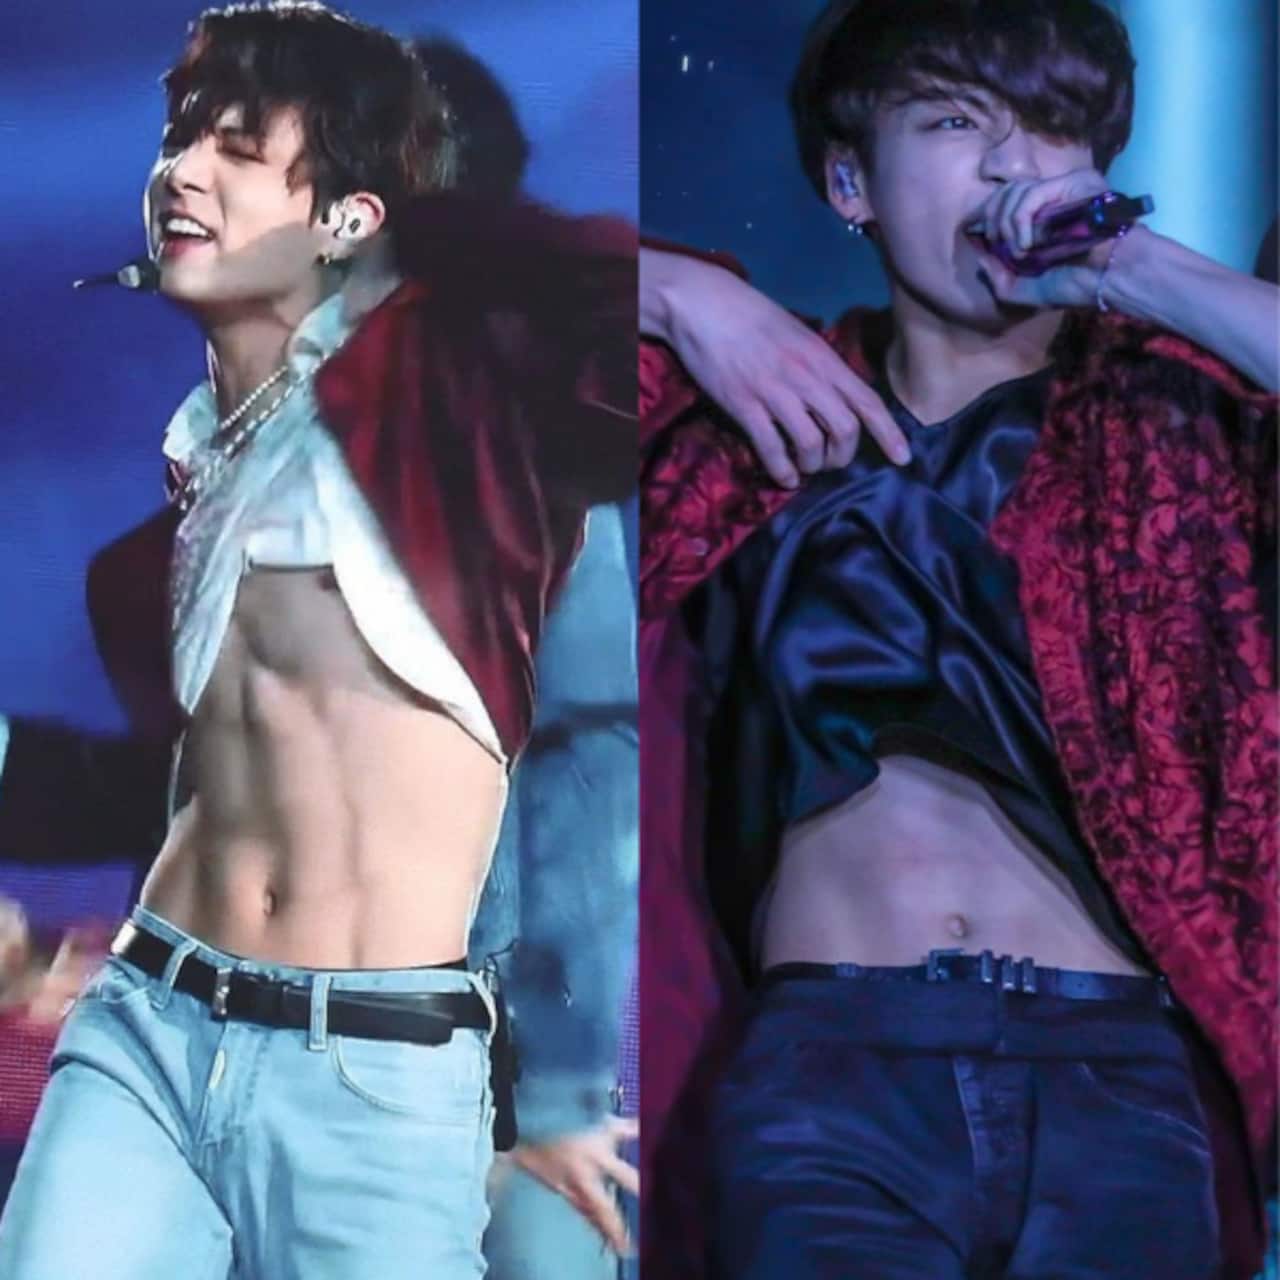 Bts Jungkook Loves To Flaunt His Abs On Stage And We Aint Complaining View Pics 